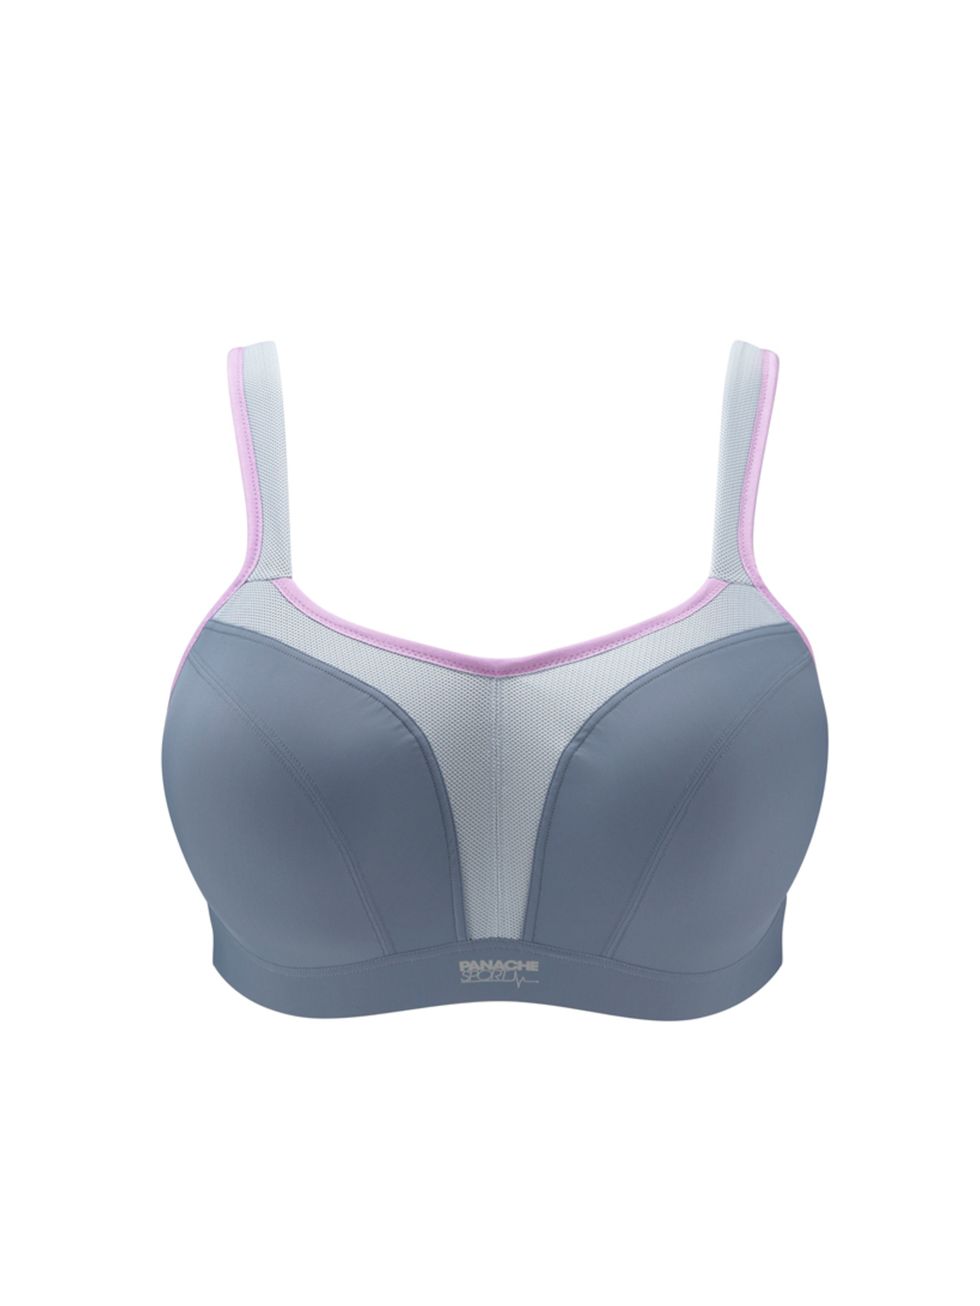 <p><strong><a href="www.panache-lingerie.com">Panache Sports Bra, £38</a></strong></p><p><strong>Sizes:</strong> 30D - 40GG</p><p><strong>Tested by:</strong> Claire</p><p><strong>Comfort:</strong> The soft fabric makes this very comfortable. The thick str